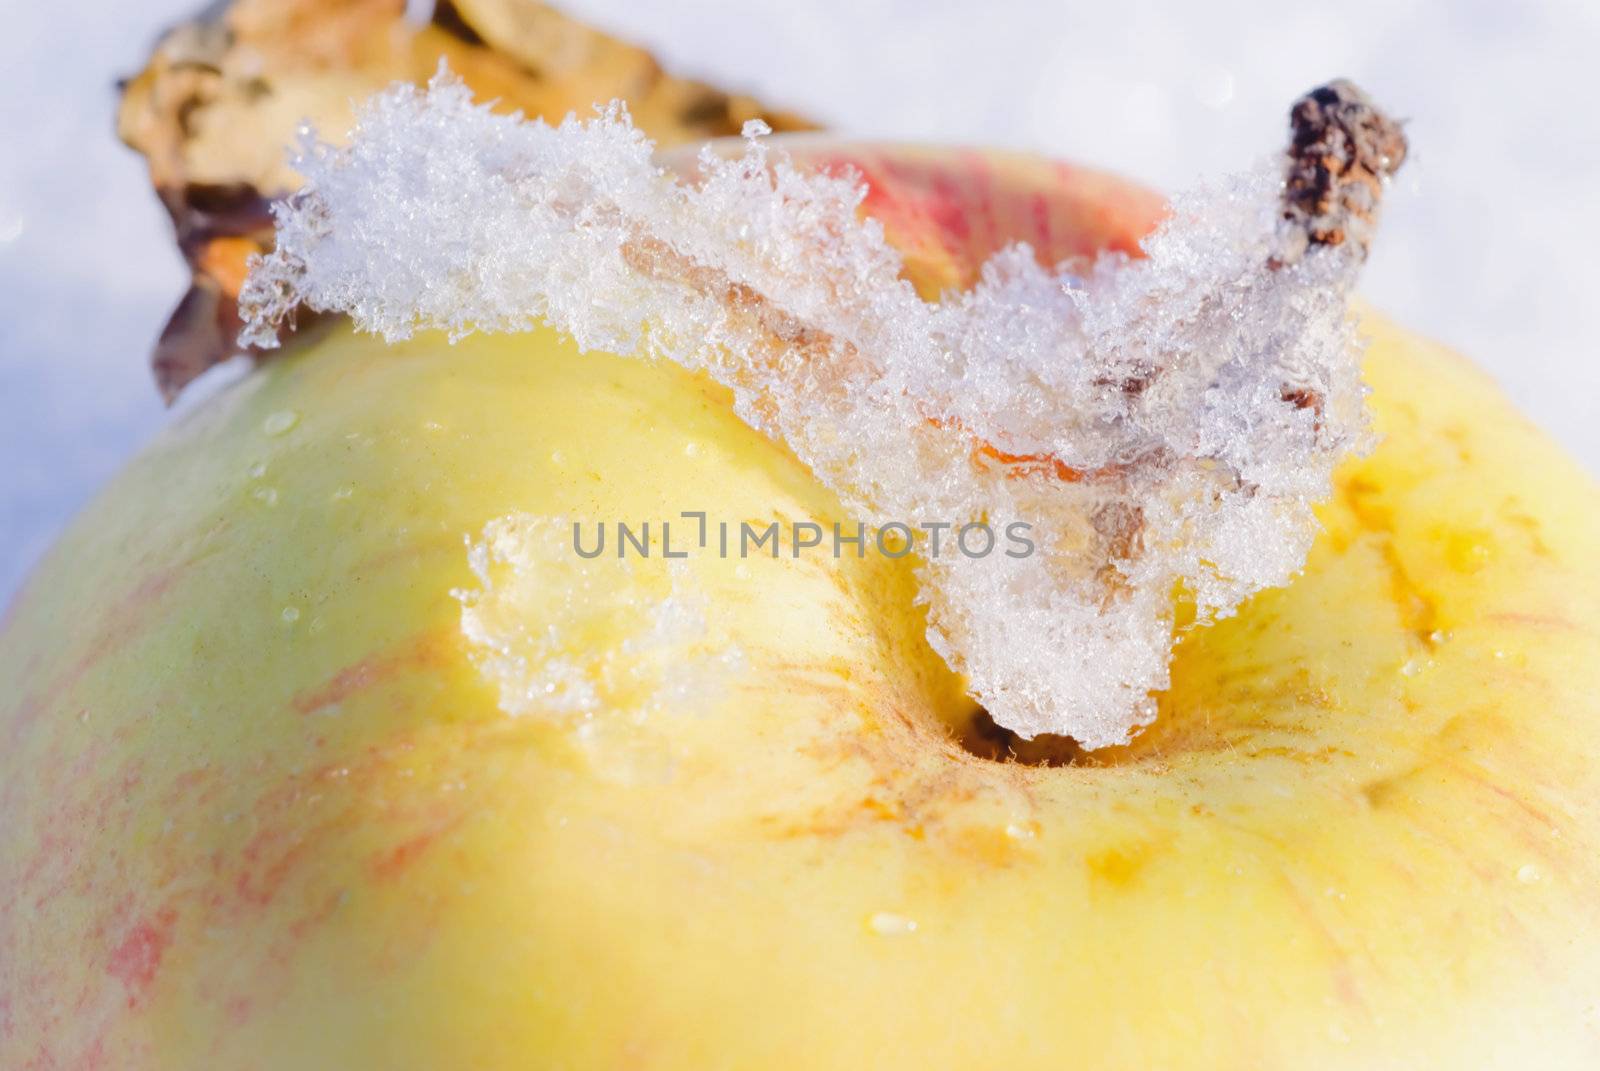 Melting snow on a red apple, a drop of water